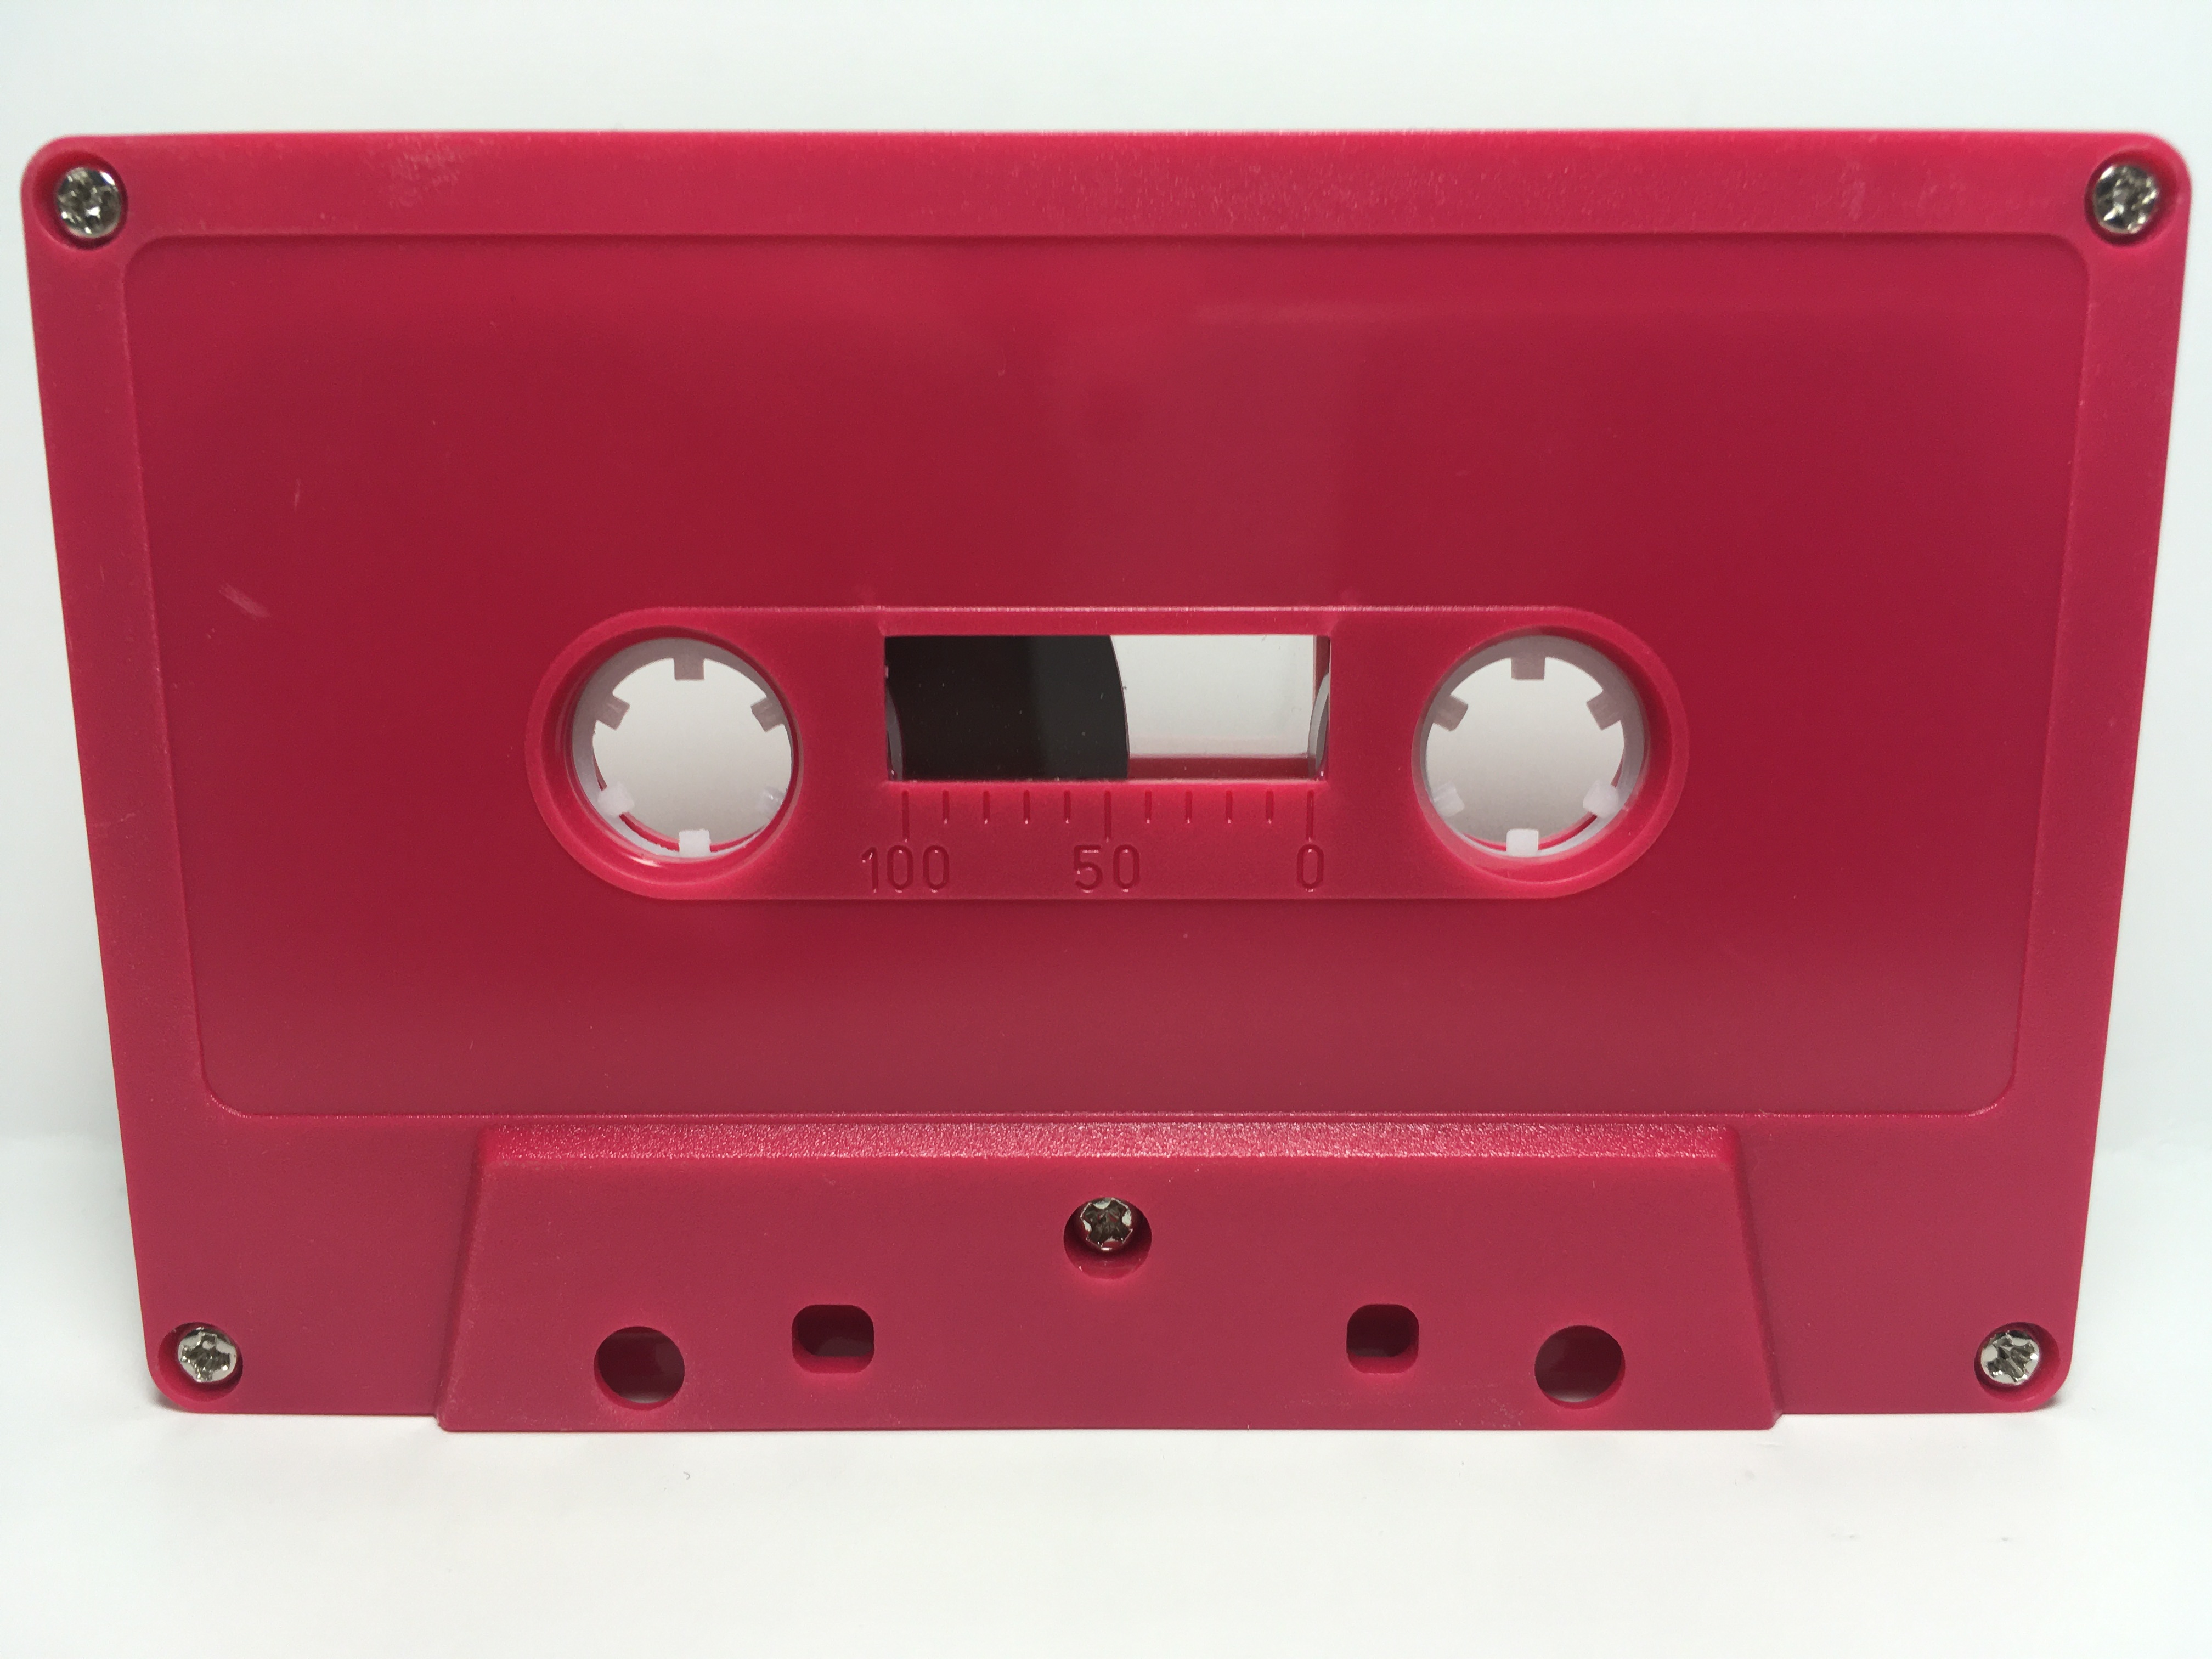 C-27 Normal Bias Rubine Red Cassettes 16 Pack